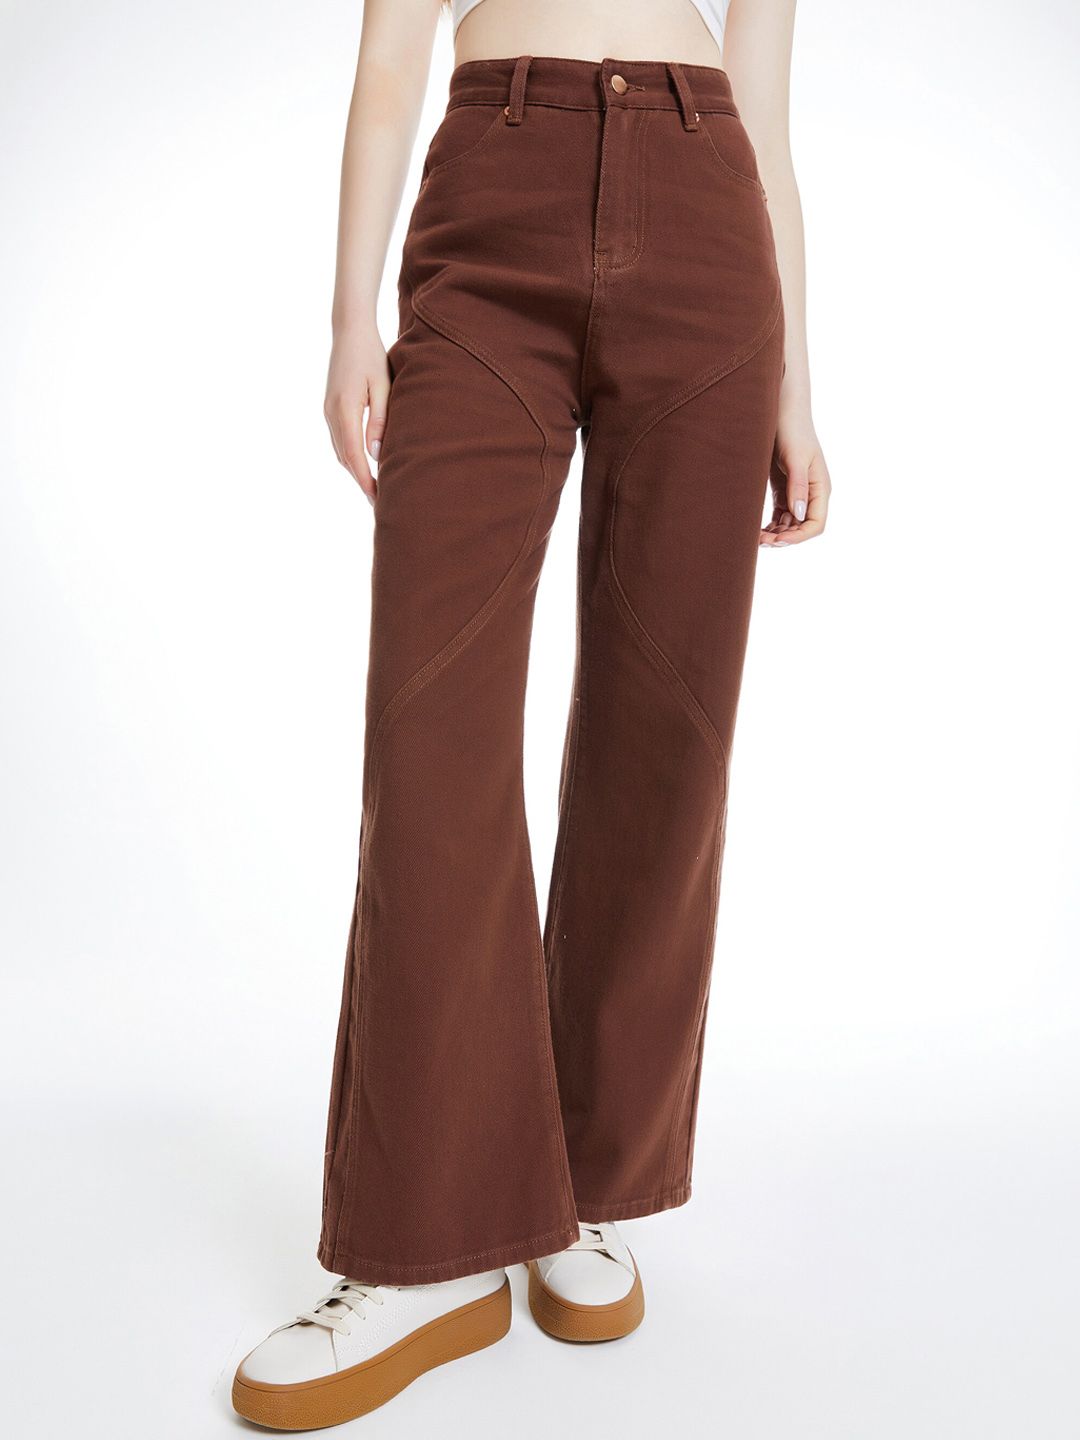 URBANIC Women Brown Relaxed Fit Jeans Price in India